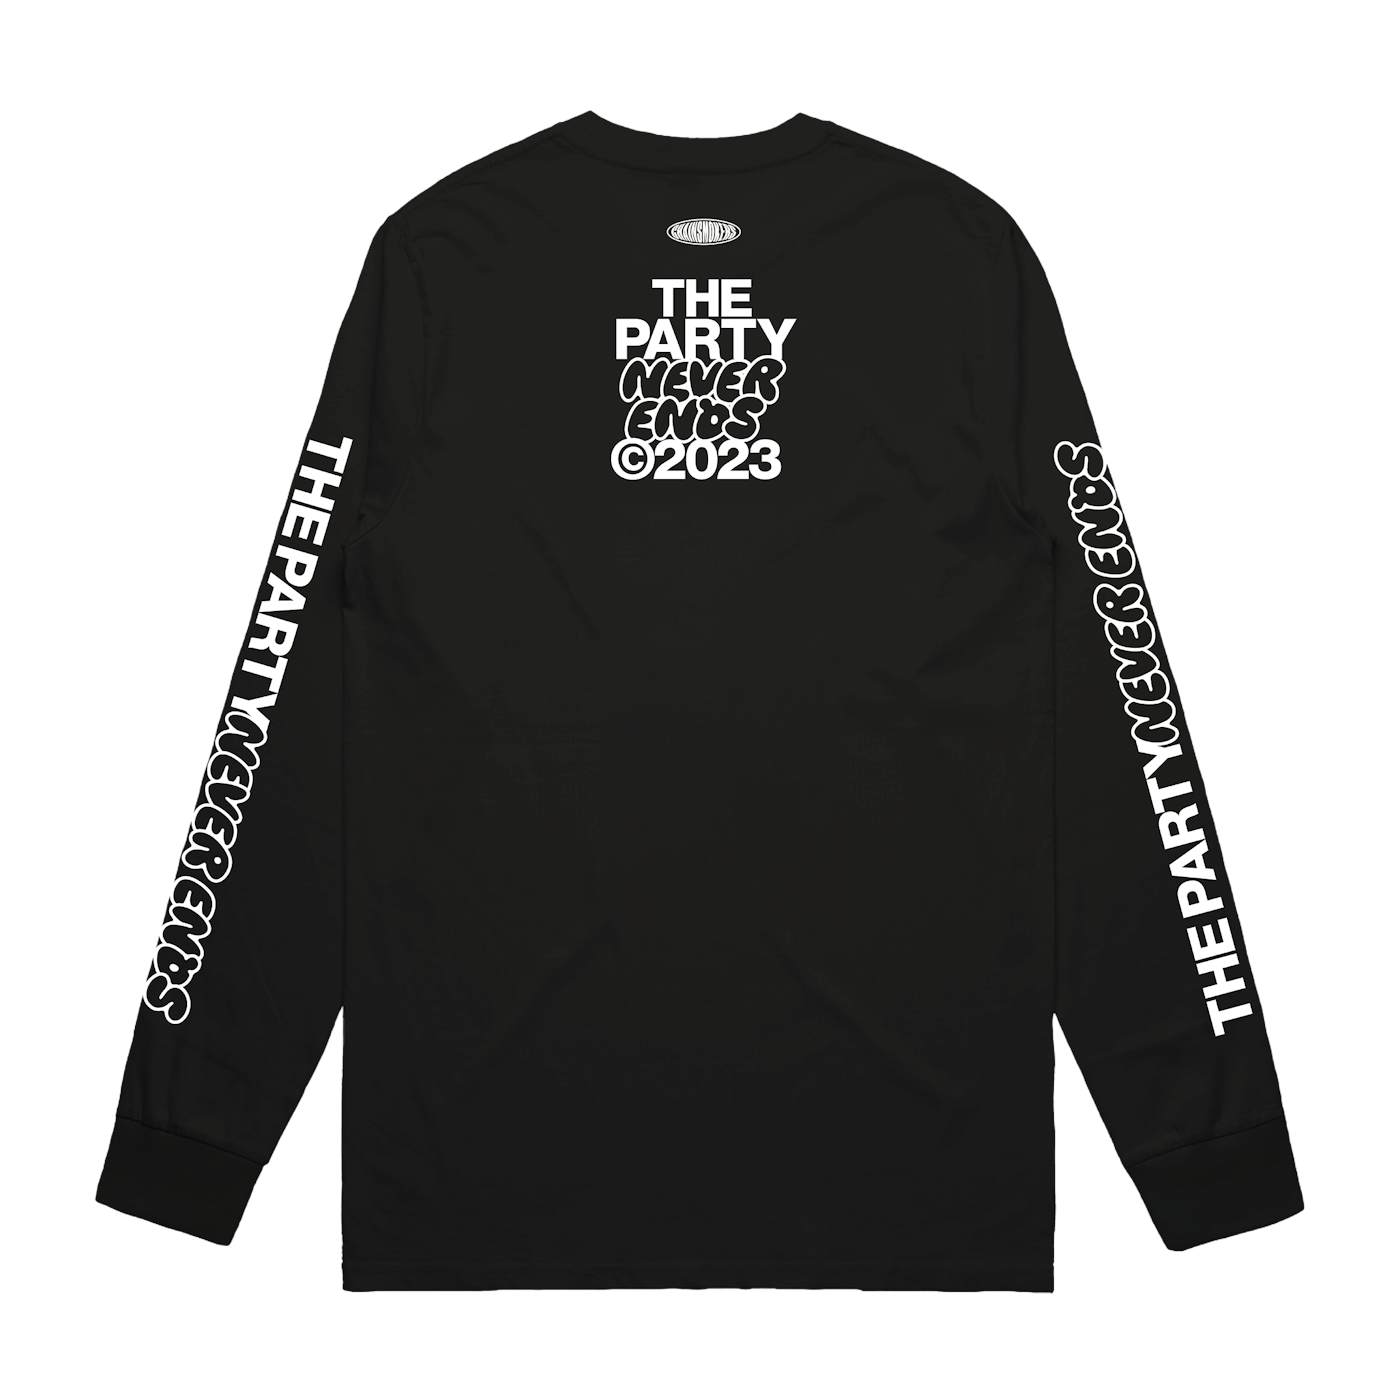 The Chainsmokers The Party Never Ends - Long Sleeve Tee